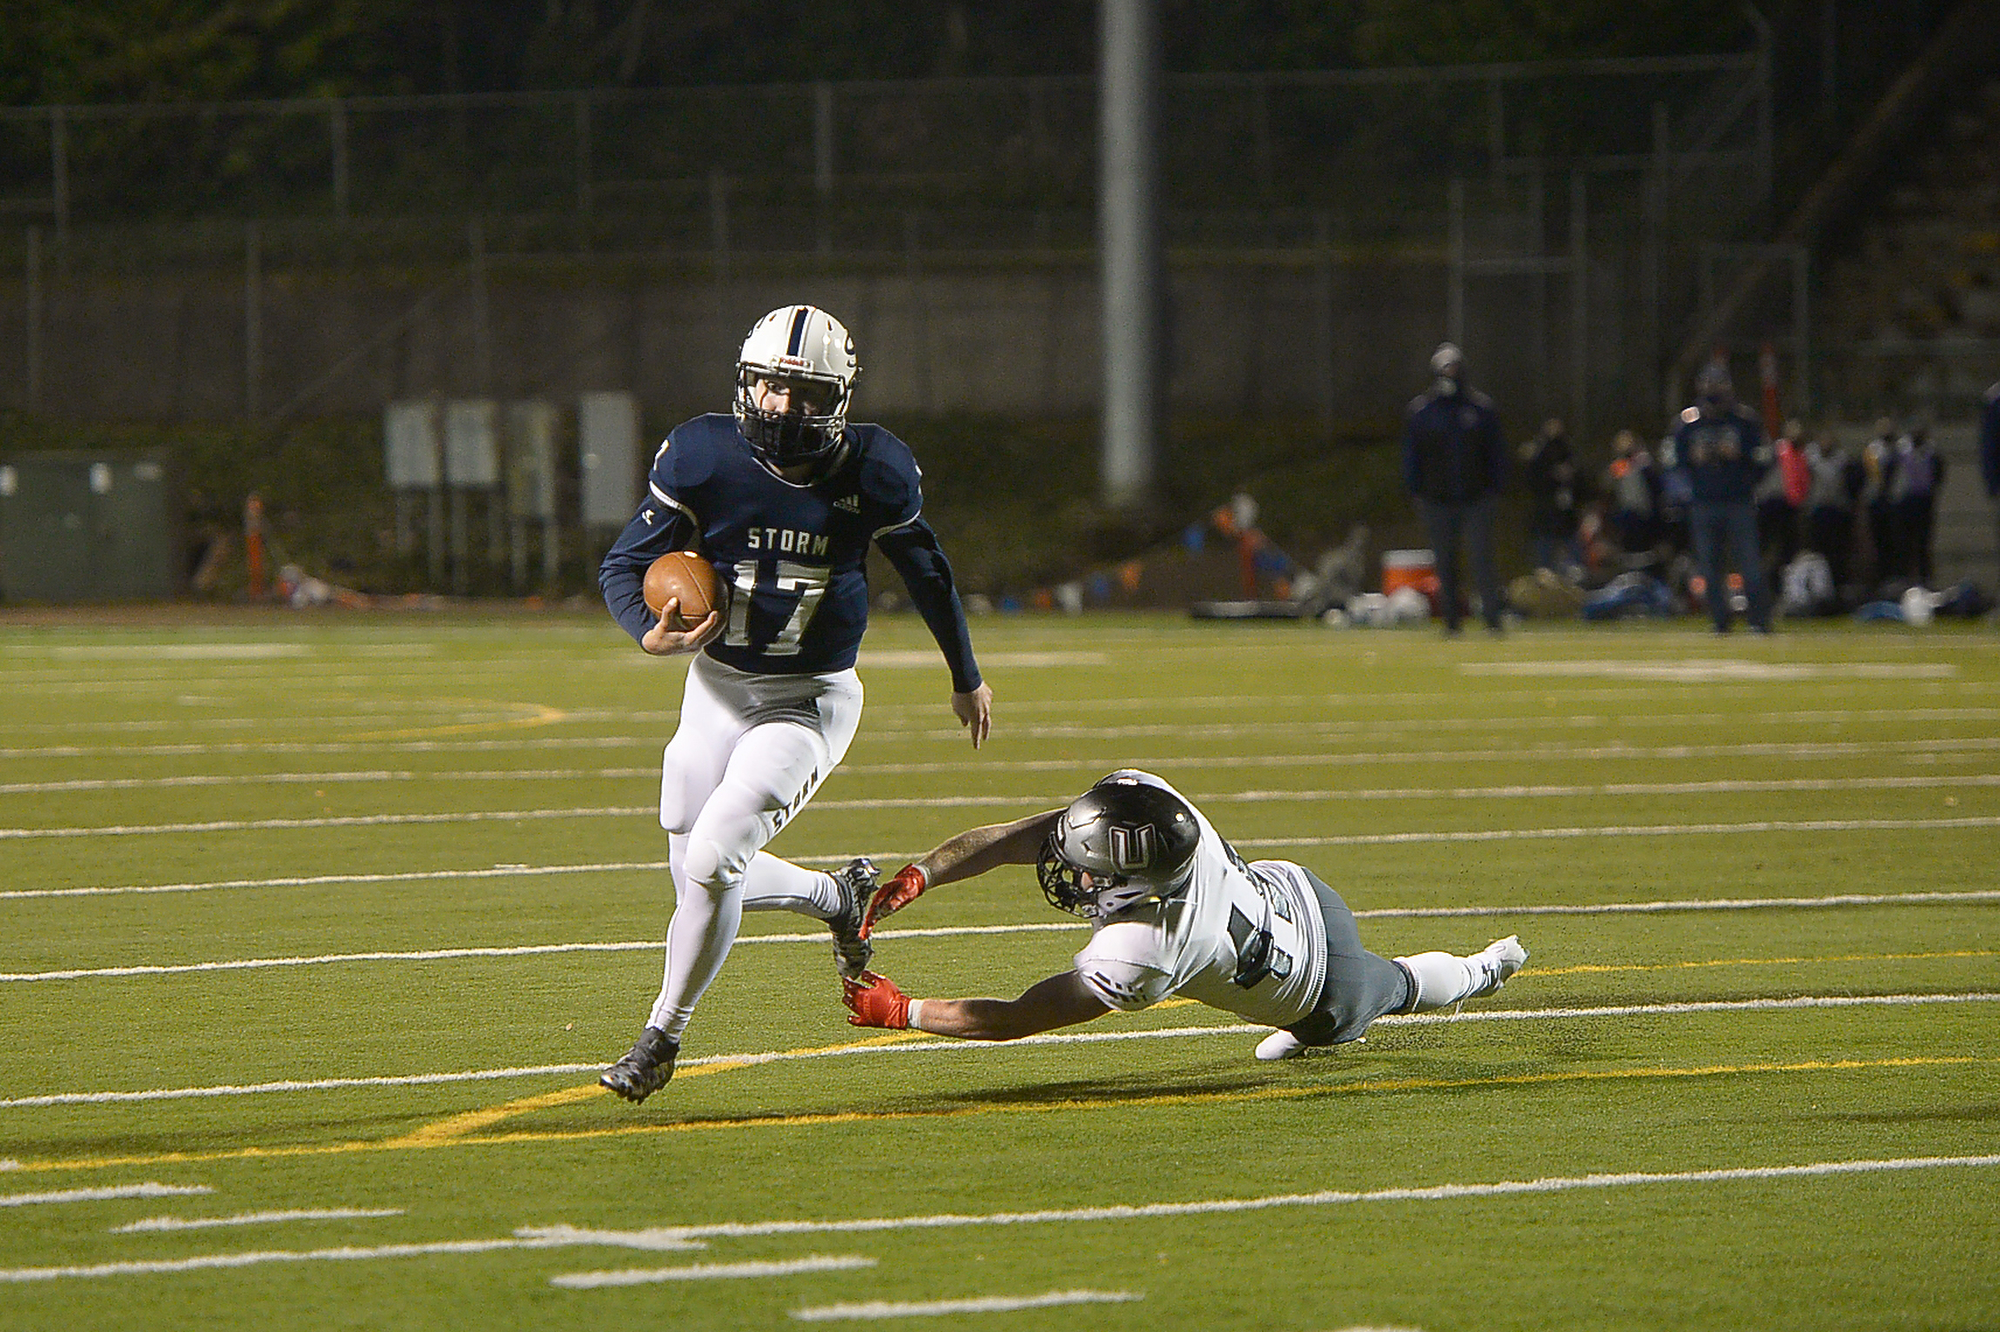 Skyview quarterback Clark Coleman evades a tackle by Union's Jaden Hornsby en route to scoring a touchdown at Kiggins Bowl on Friday night, March 12, 2021.